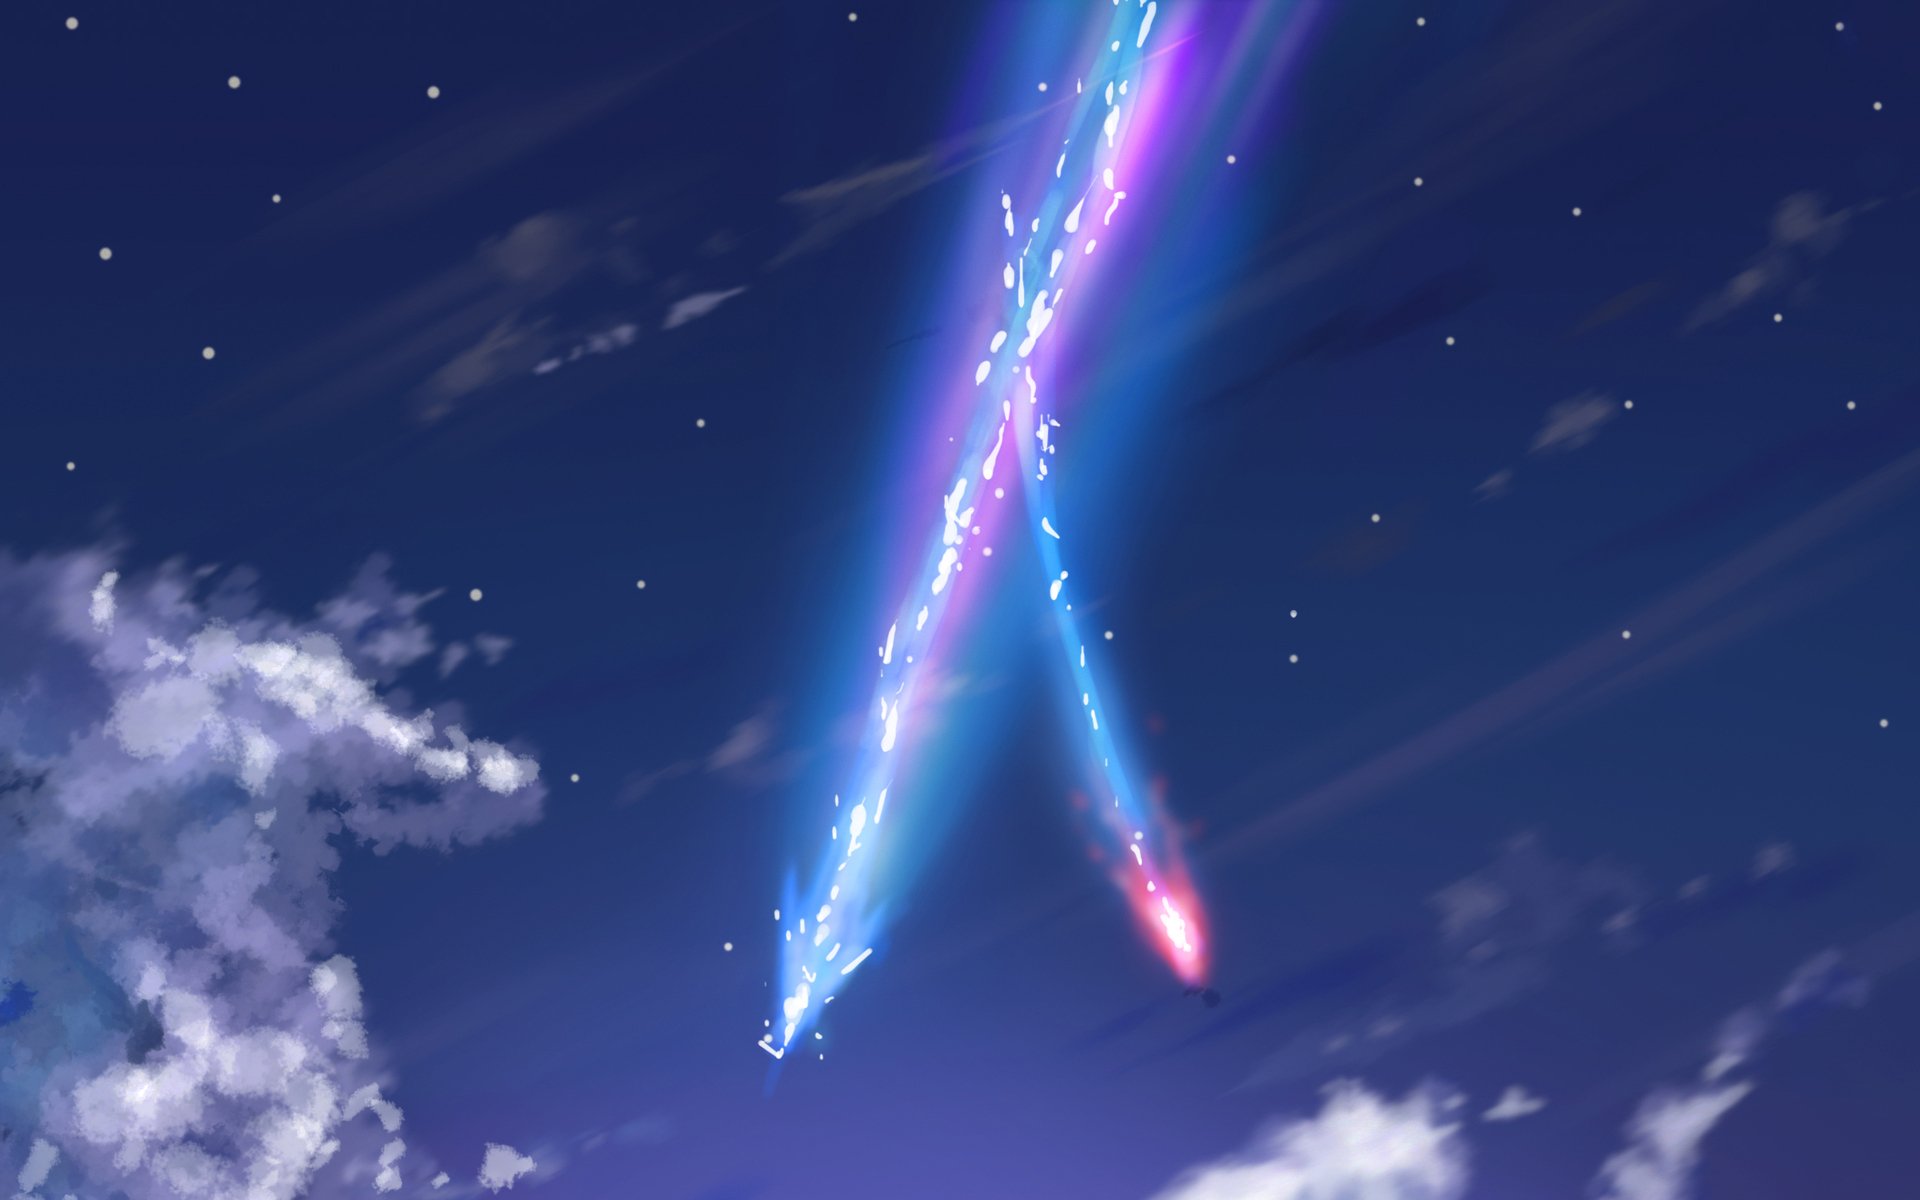  Your  Name  HD  Wallpaper  Background Image 1920x1200 